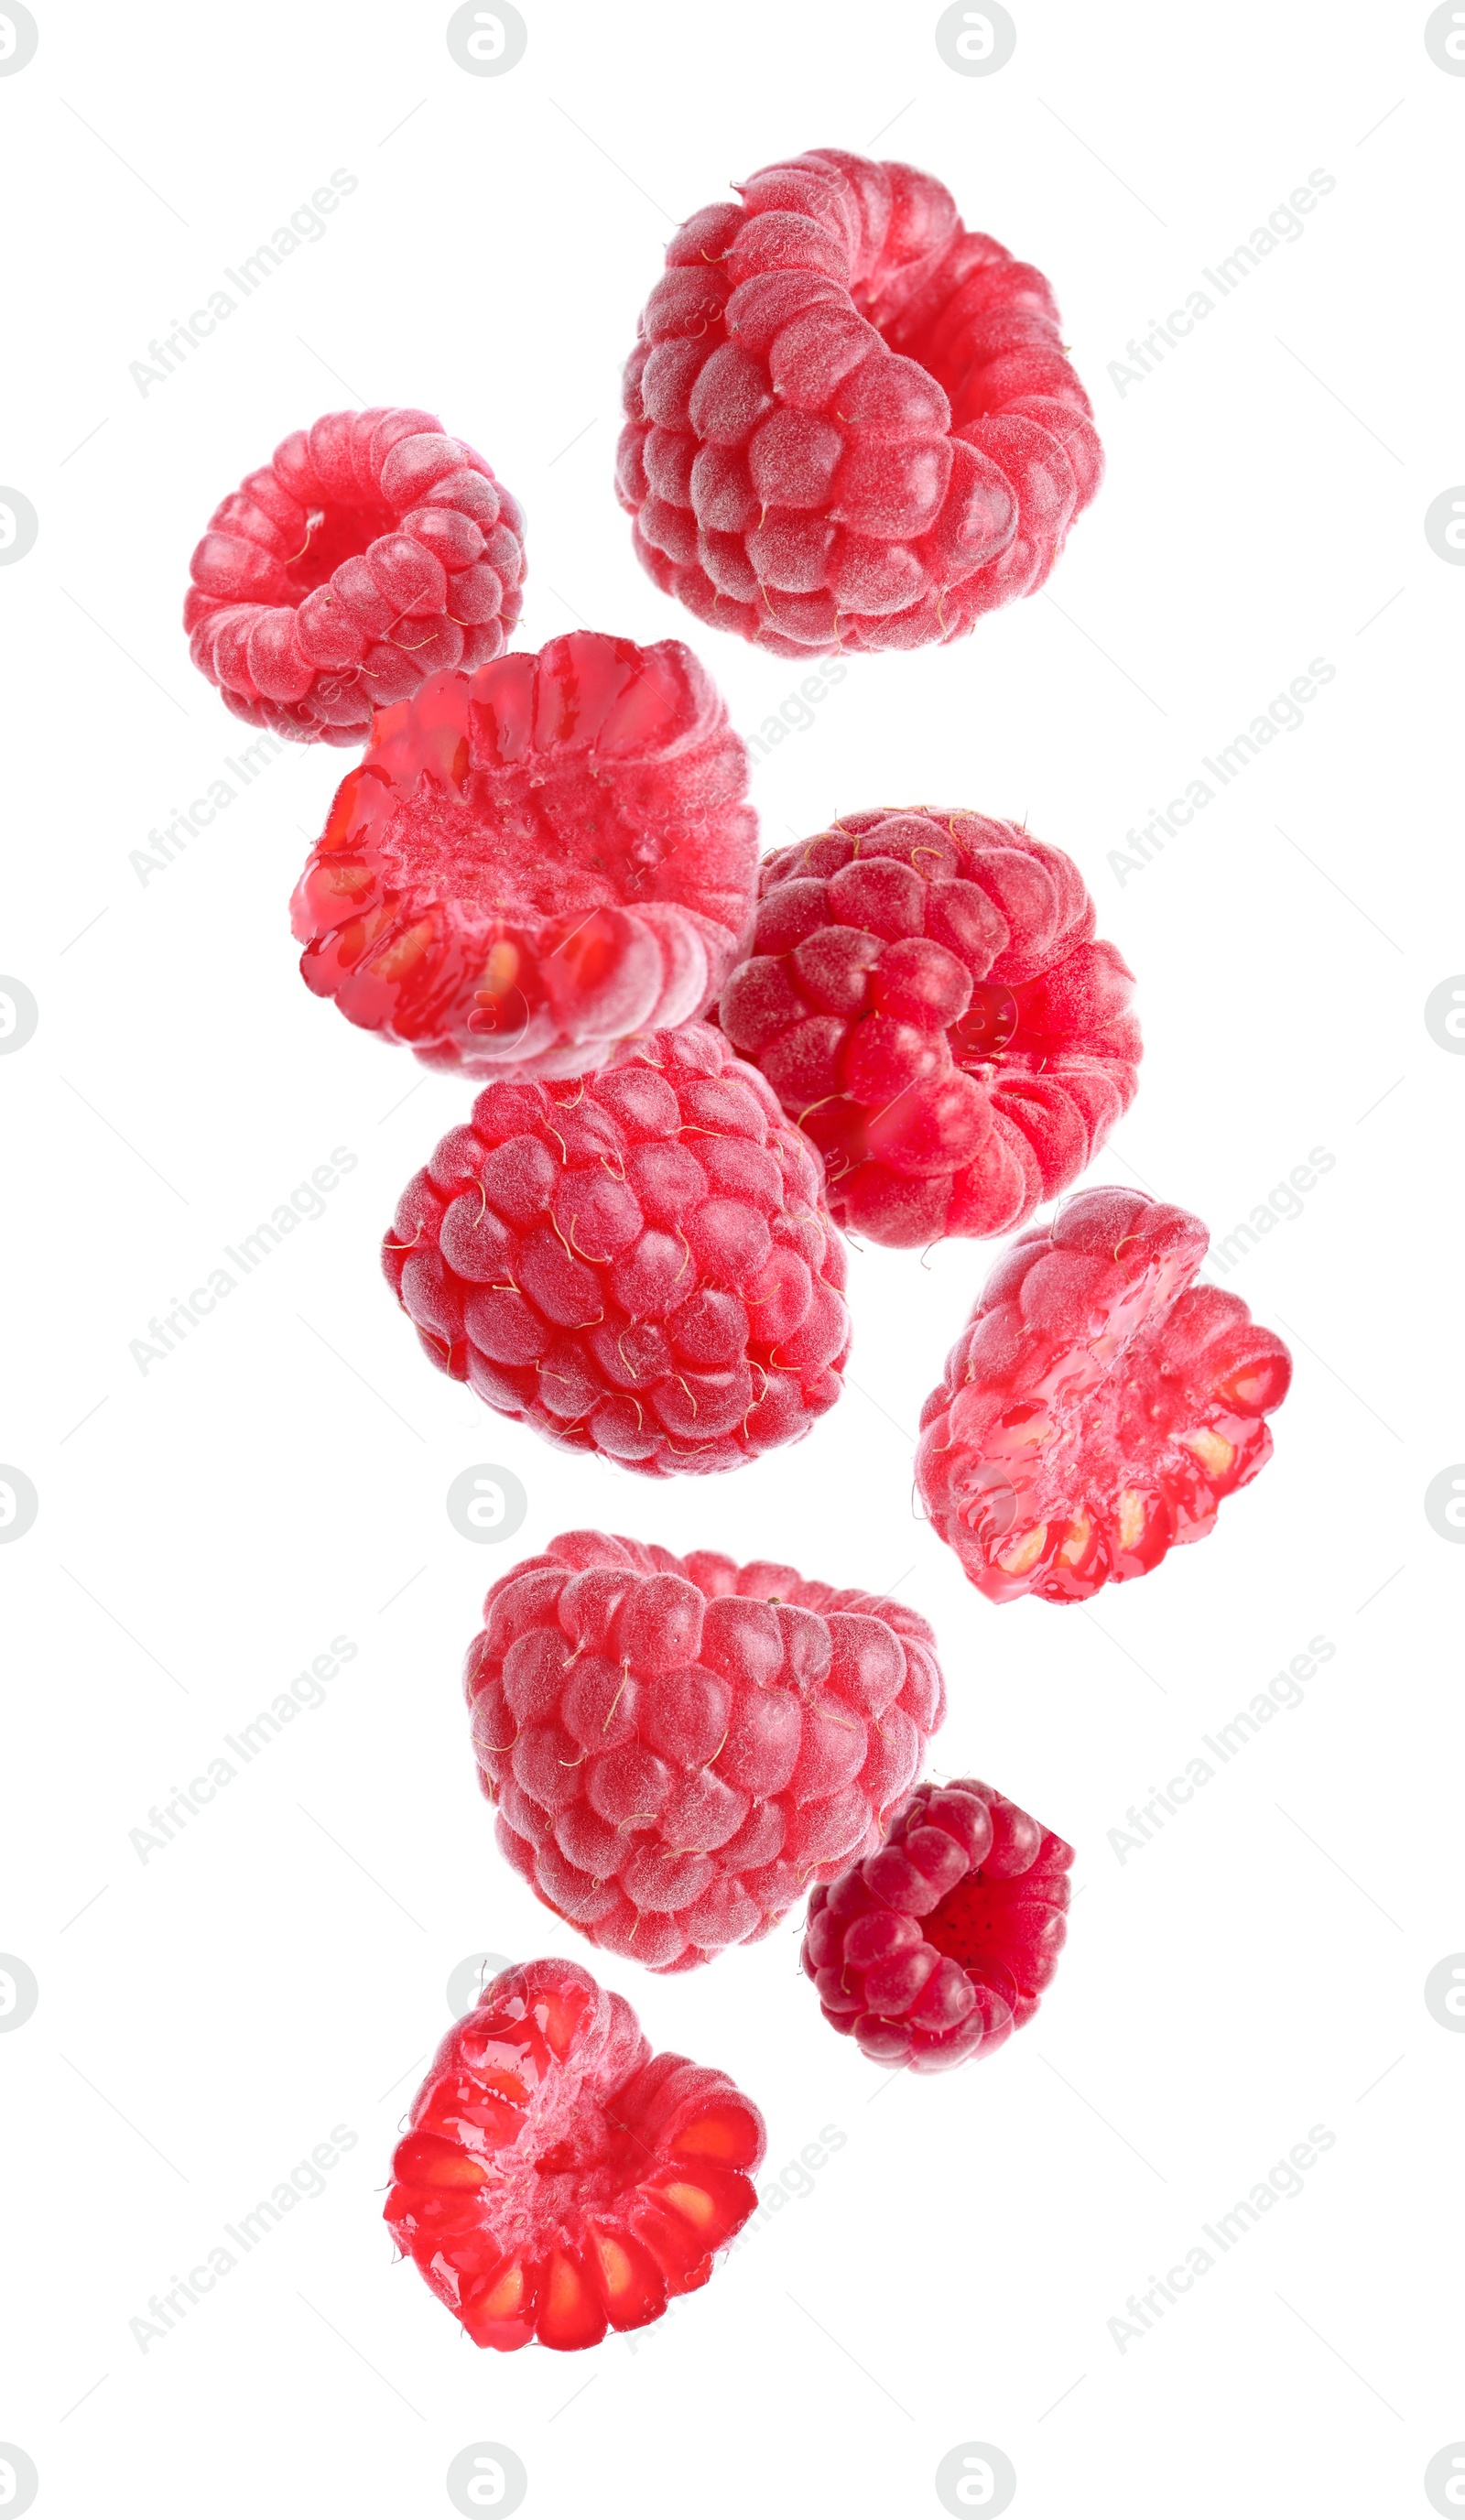 Image of Delicious ripe raspberries flying on white background